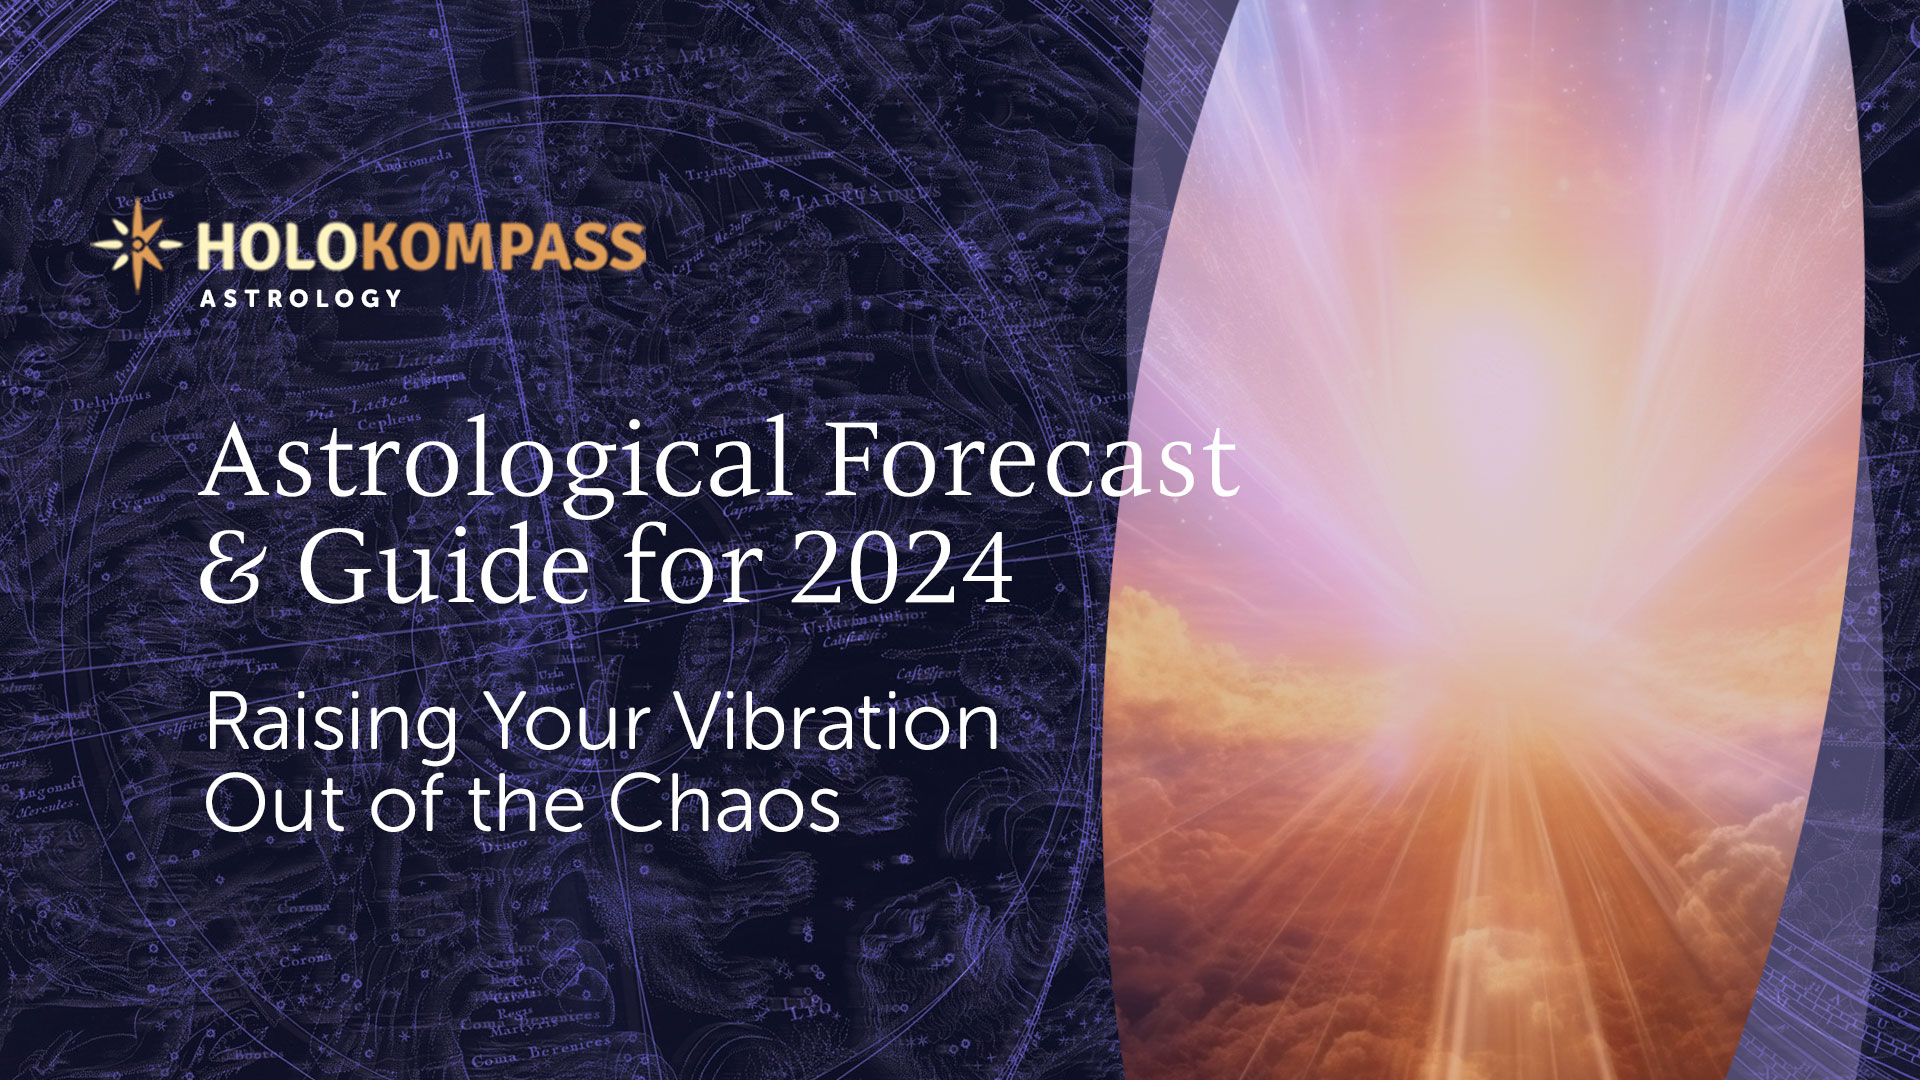 Astrological Forecast & Guide to 2024 Robert Ohotto